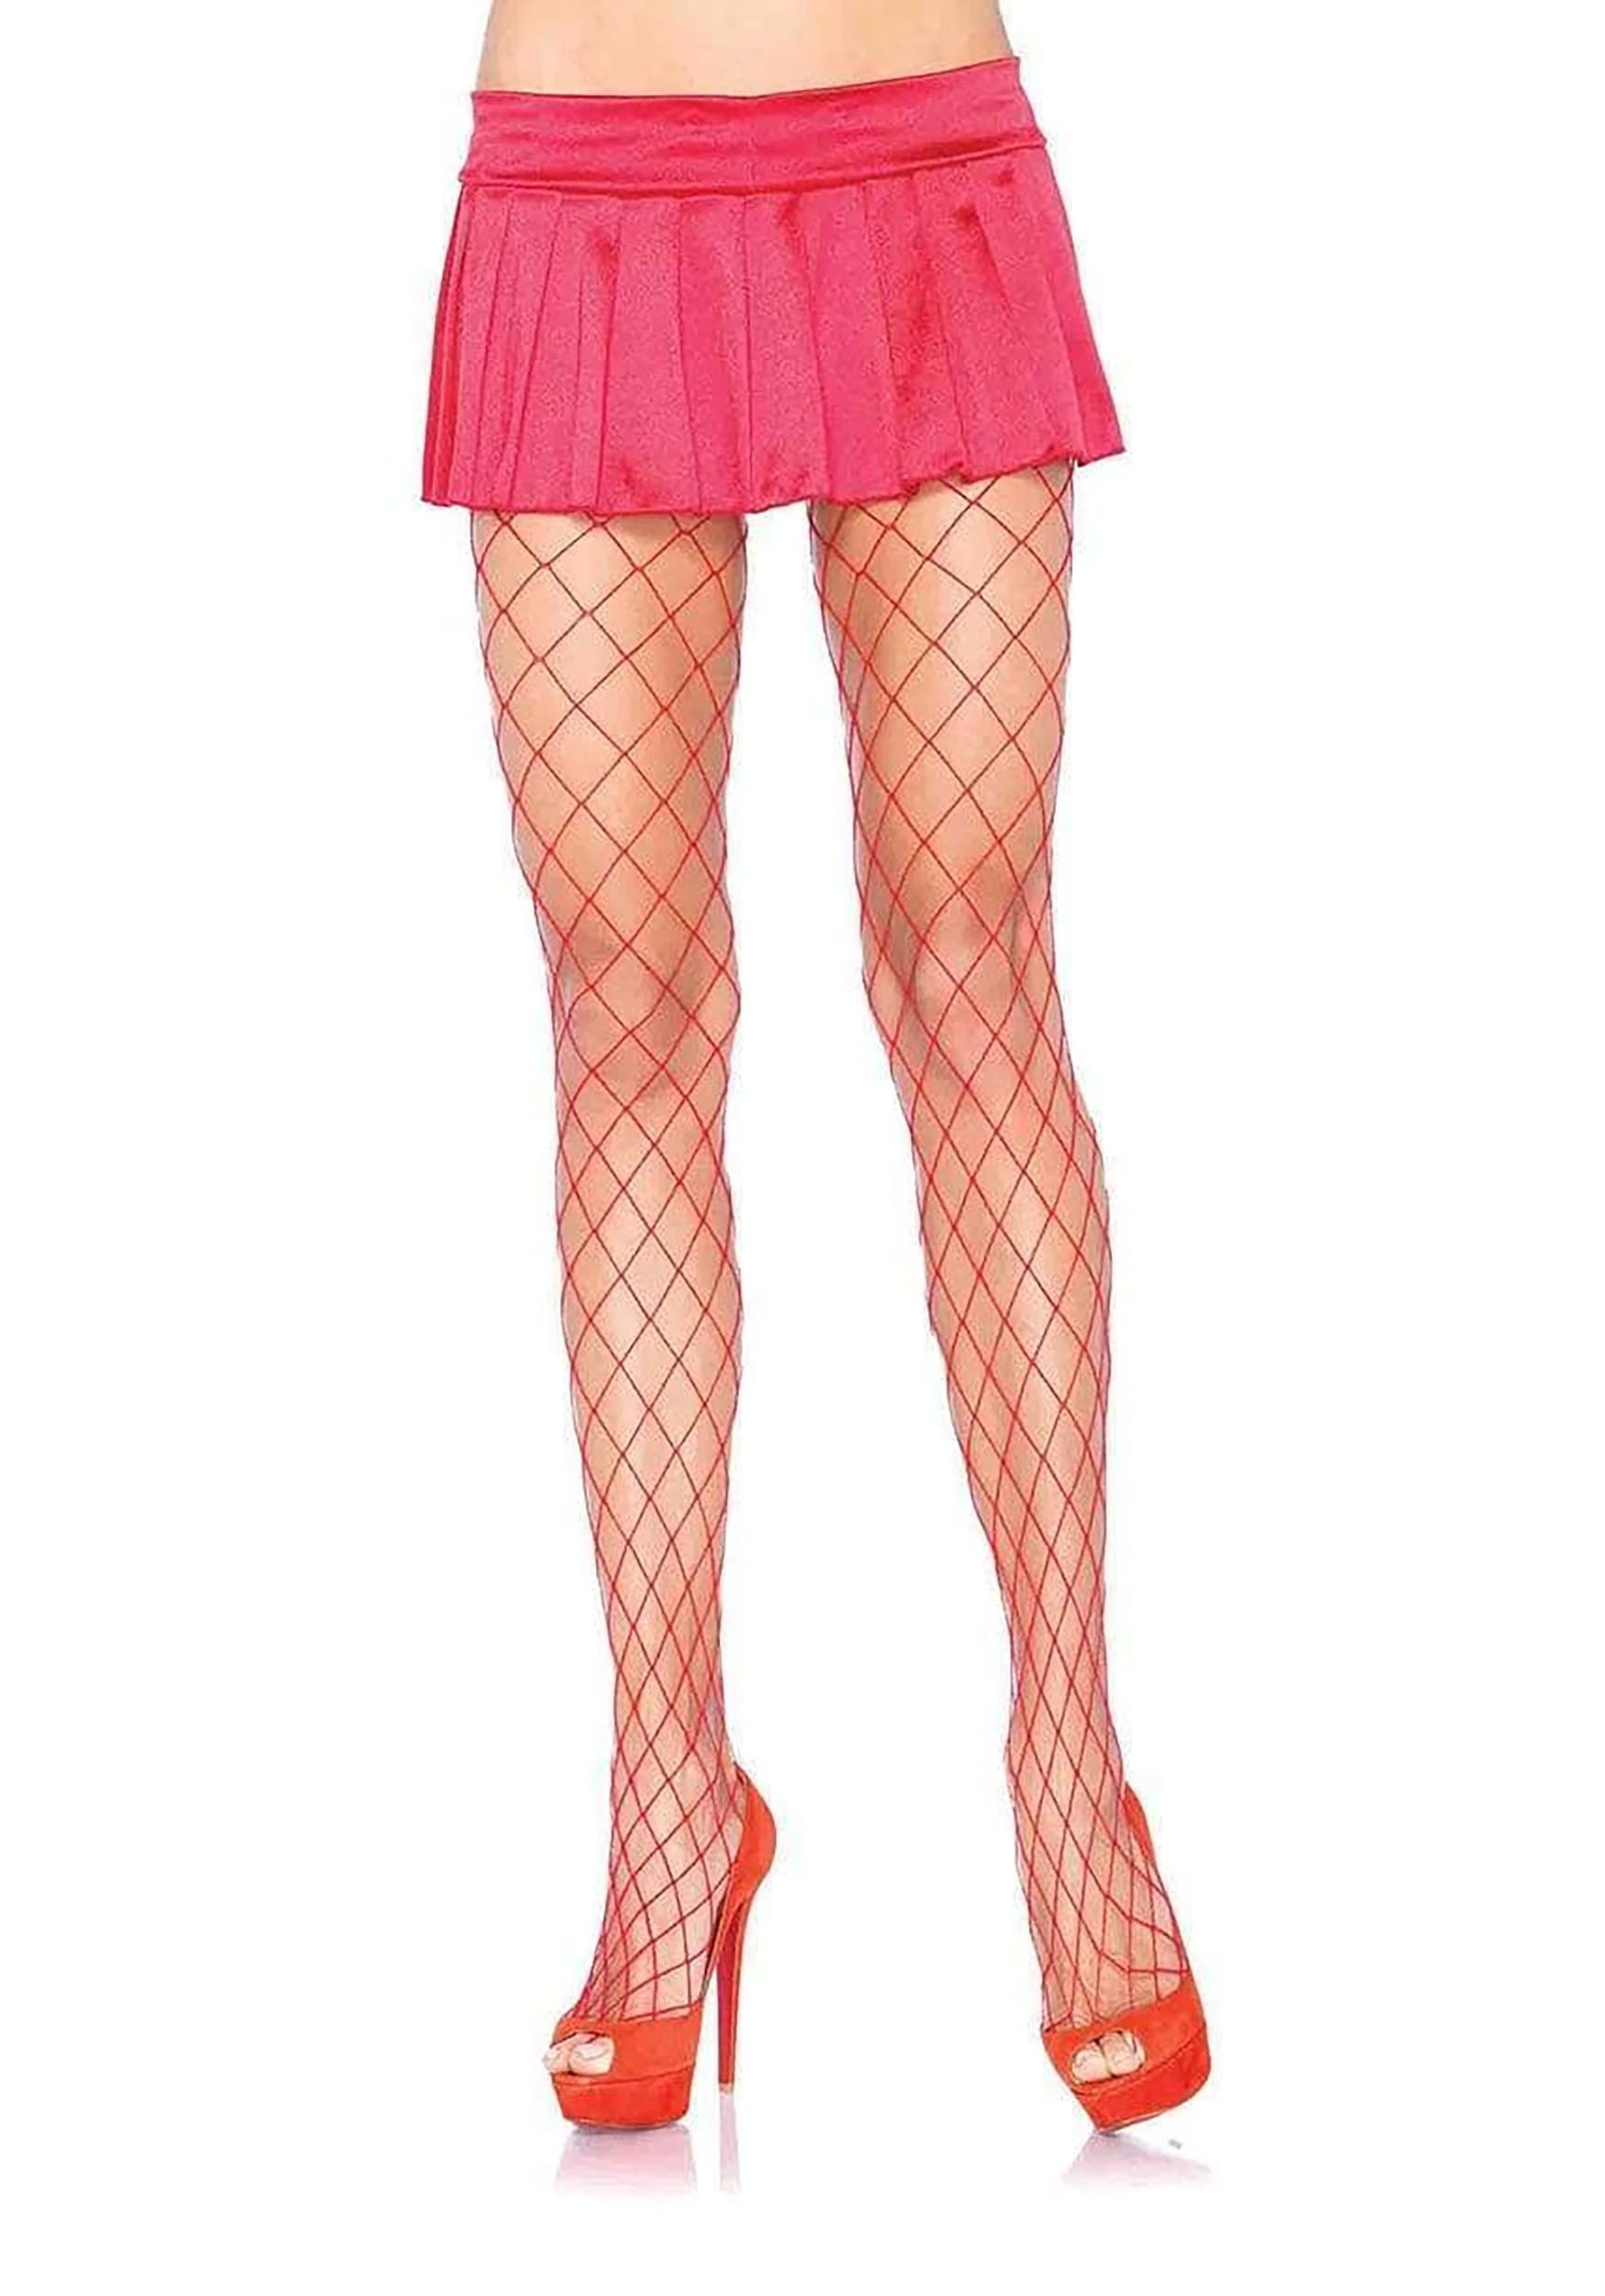 Women's Red Fence Net Tights